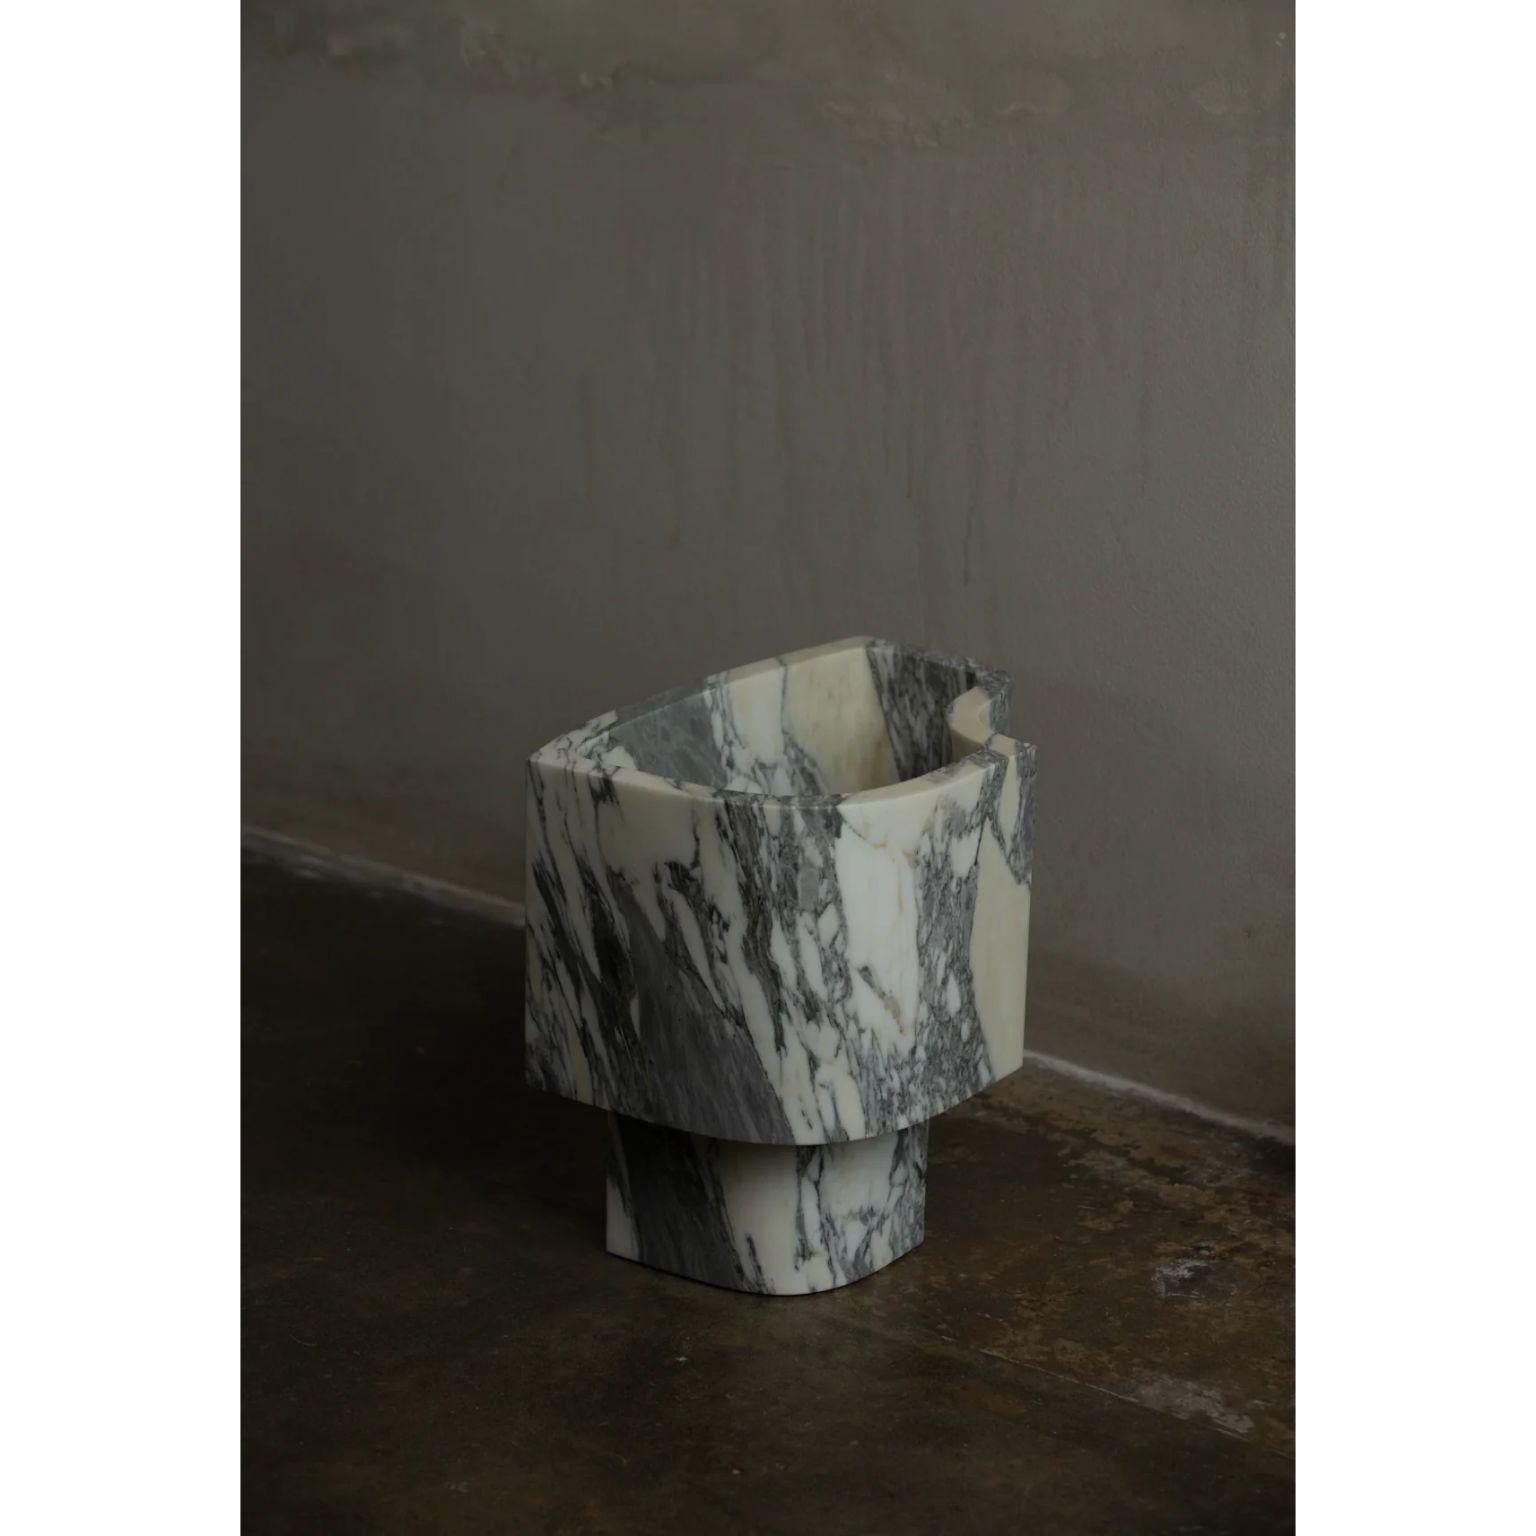 Arabescato Offset Lamp by Henry Wilson
Dimensions: W 44.5 x D 30 x H 39 cm
Materials: Arabescato Marble

Offset Lamp is hewn from two pieces of solid Arabescato Marble. As stone is a natural material, variations of the pattern will occur from piece